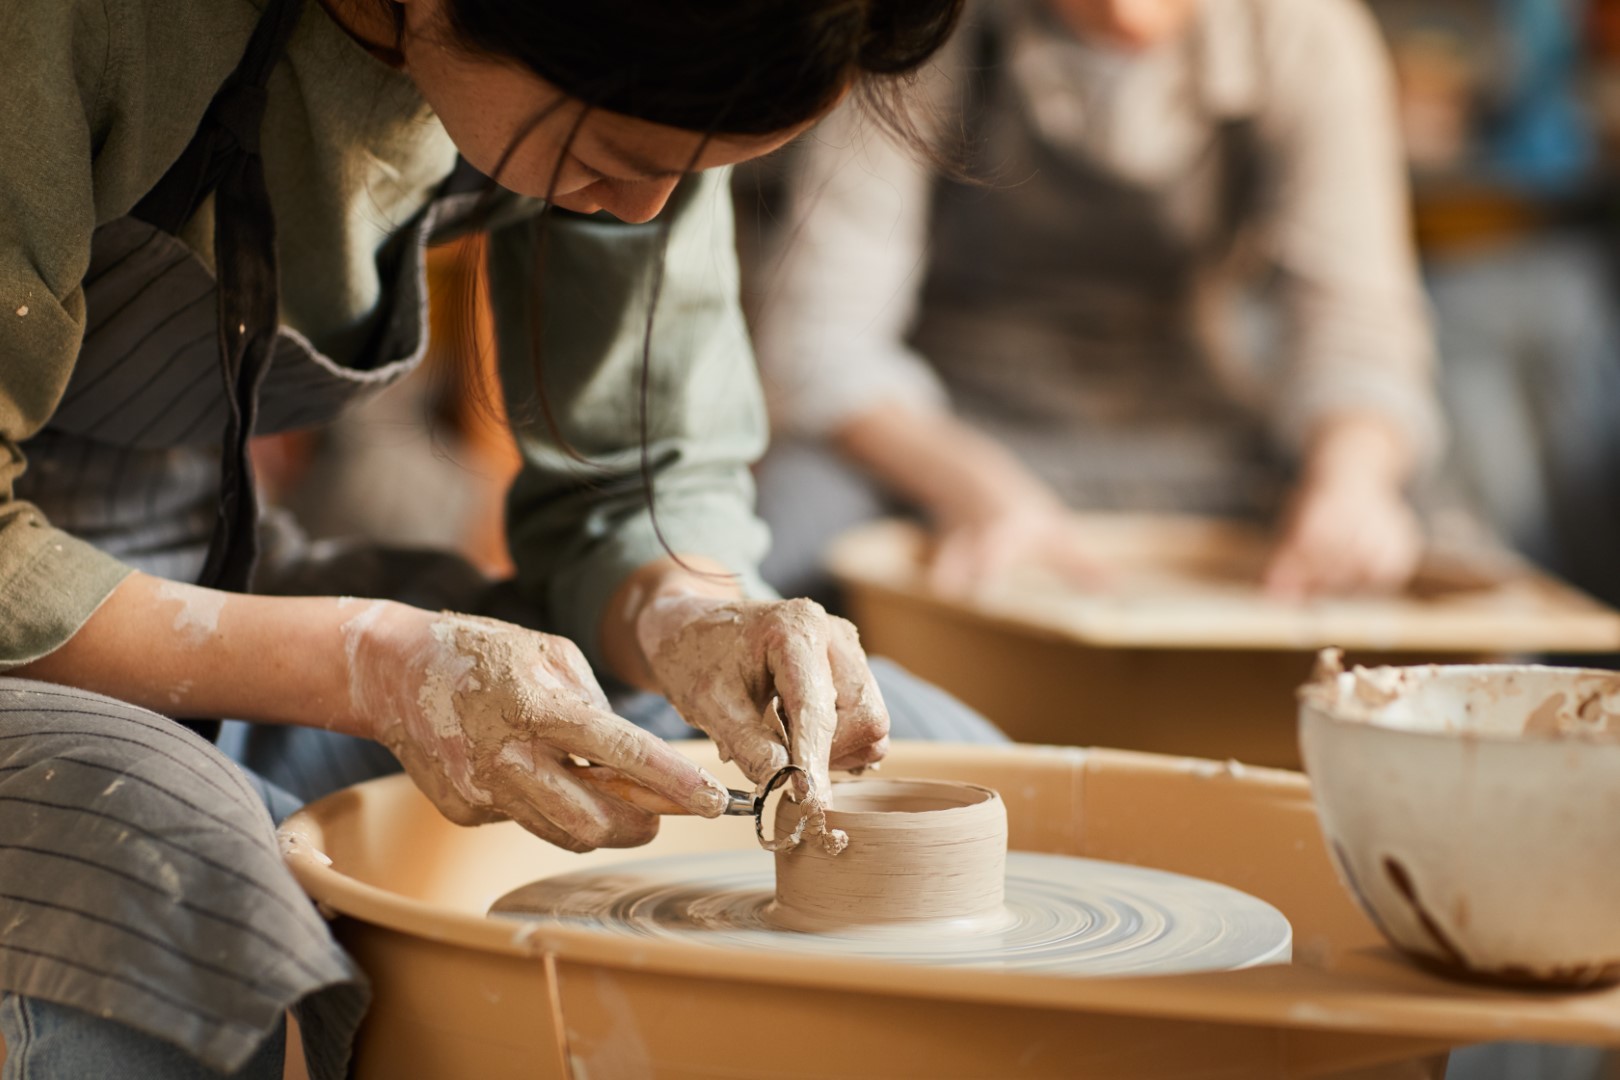 A young woman using a pottery wheel looking down